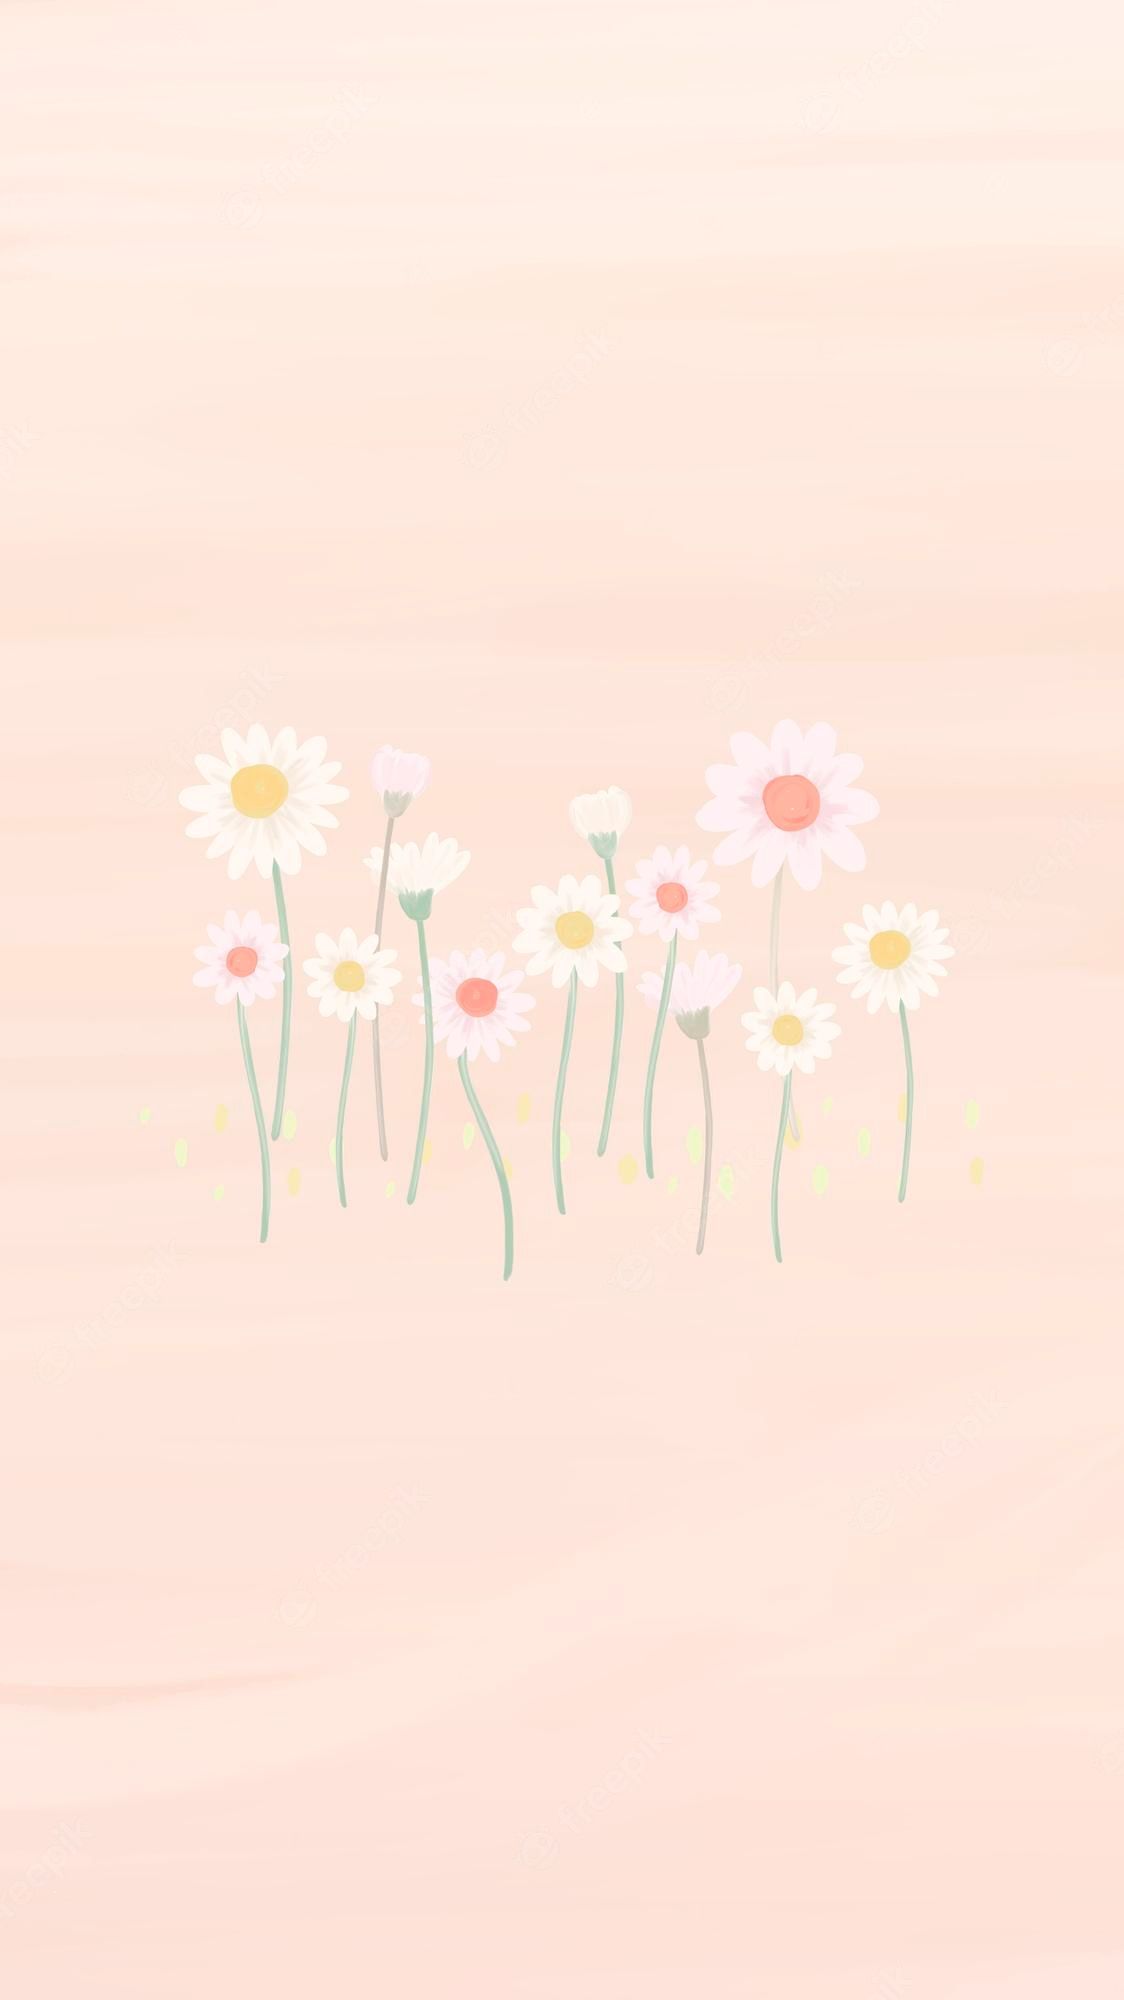 Free Vector. Hand drawn daisy mobile phone wallpaper